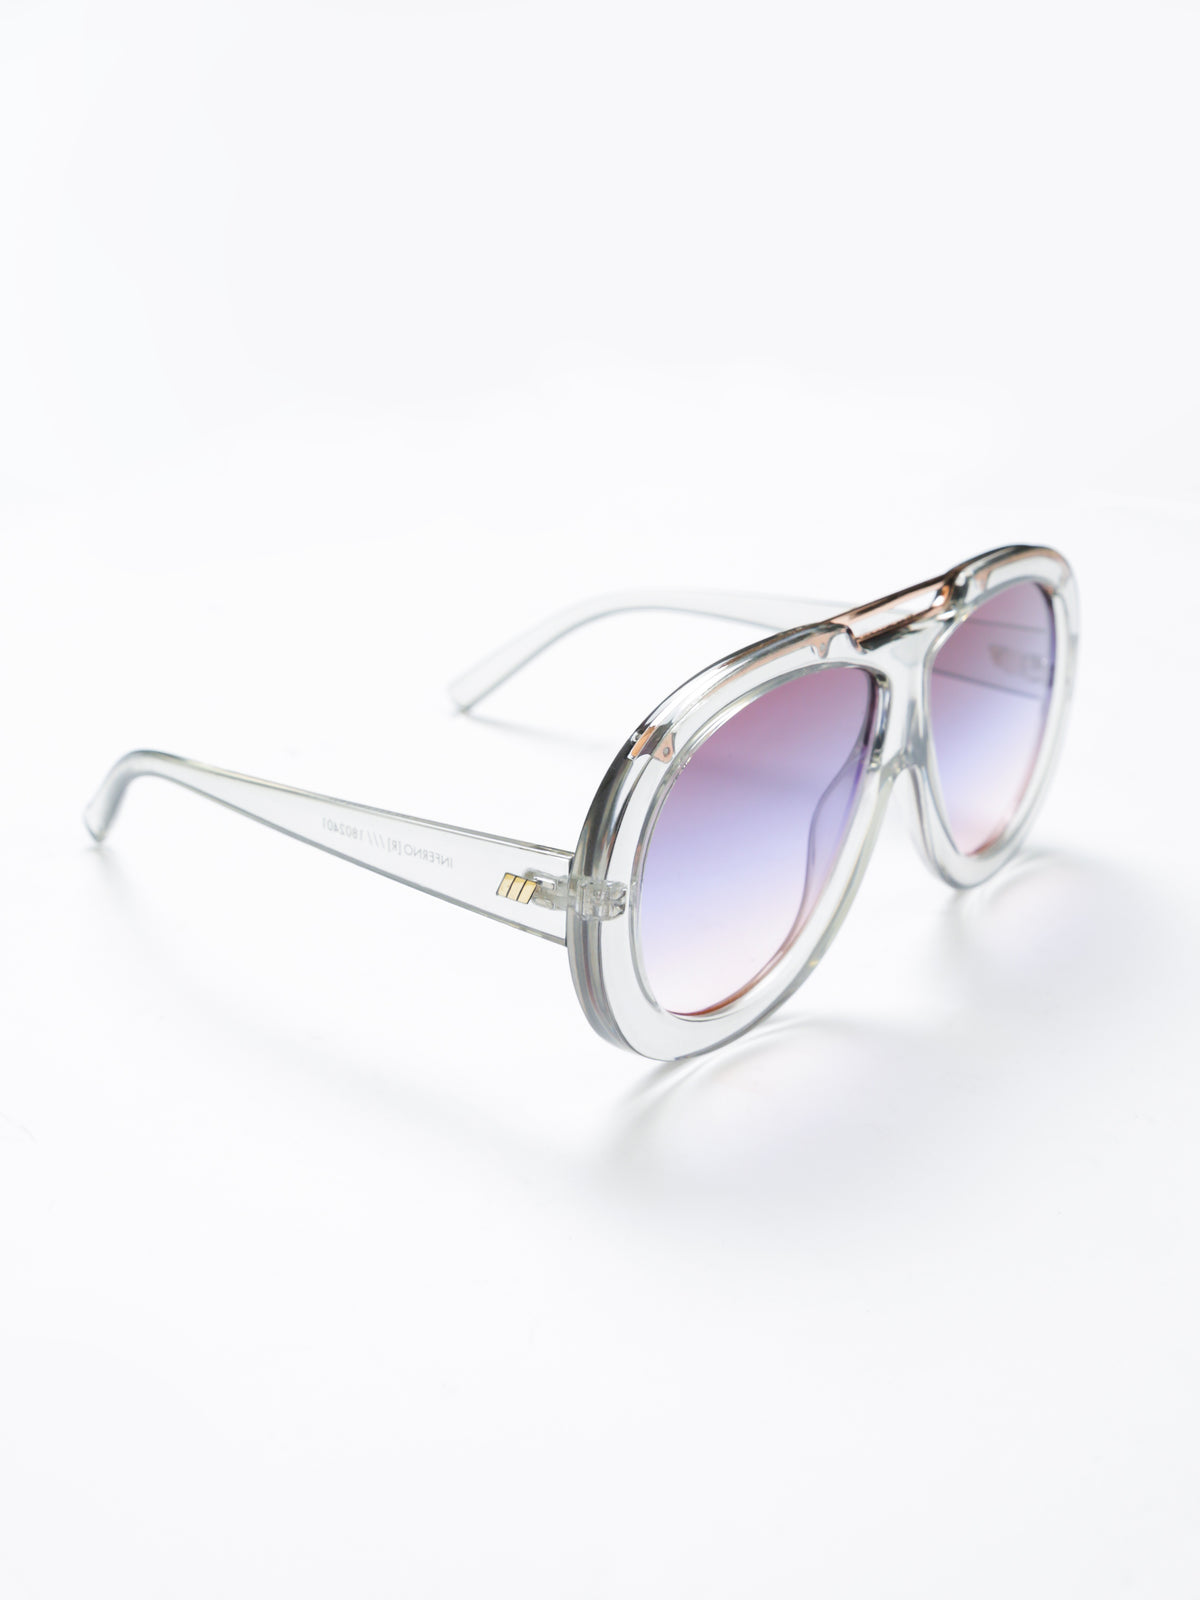 Inferno Sunglasses in Shadow Black with Purple Lens